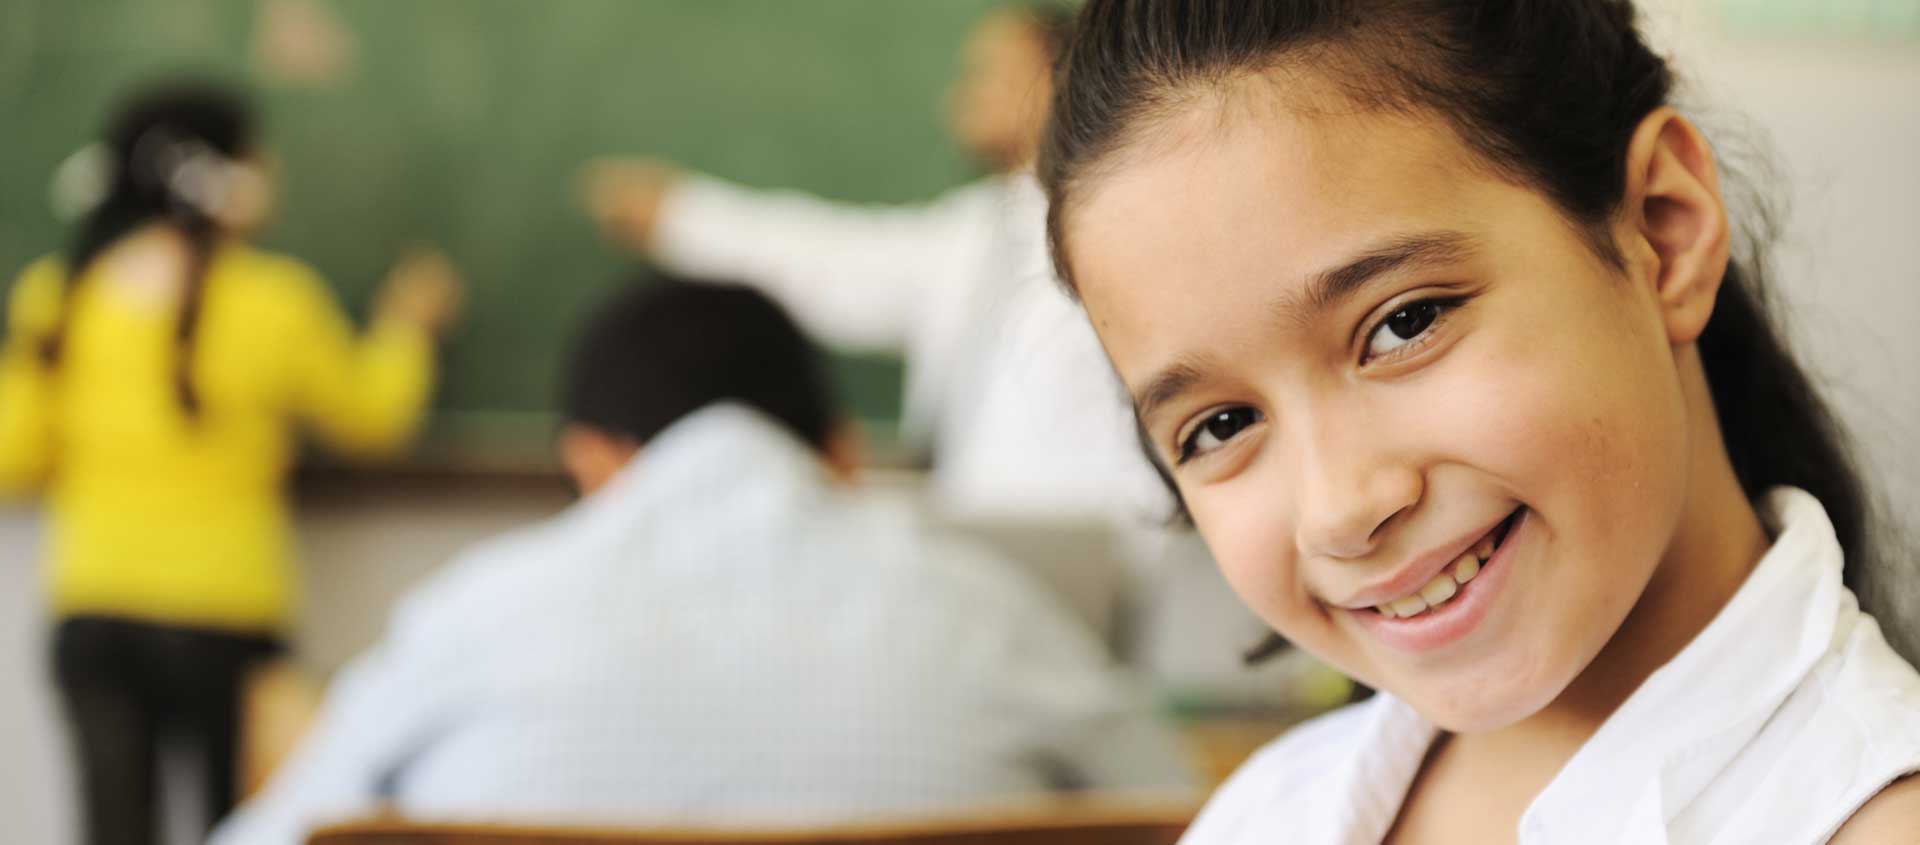 A school-aged girl with dark hair smiles ina classroom setting.